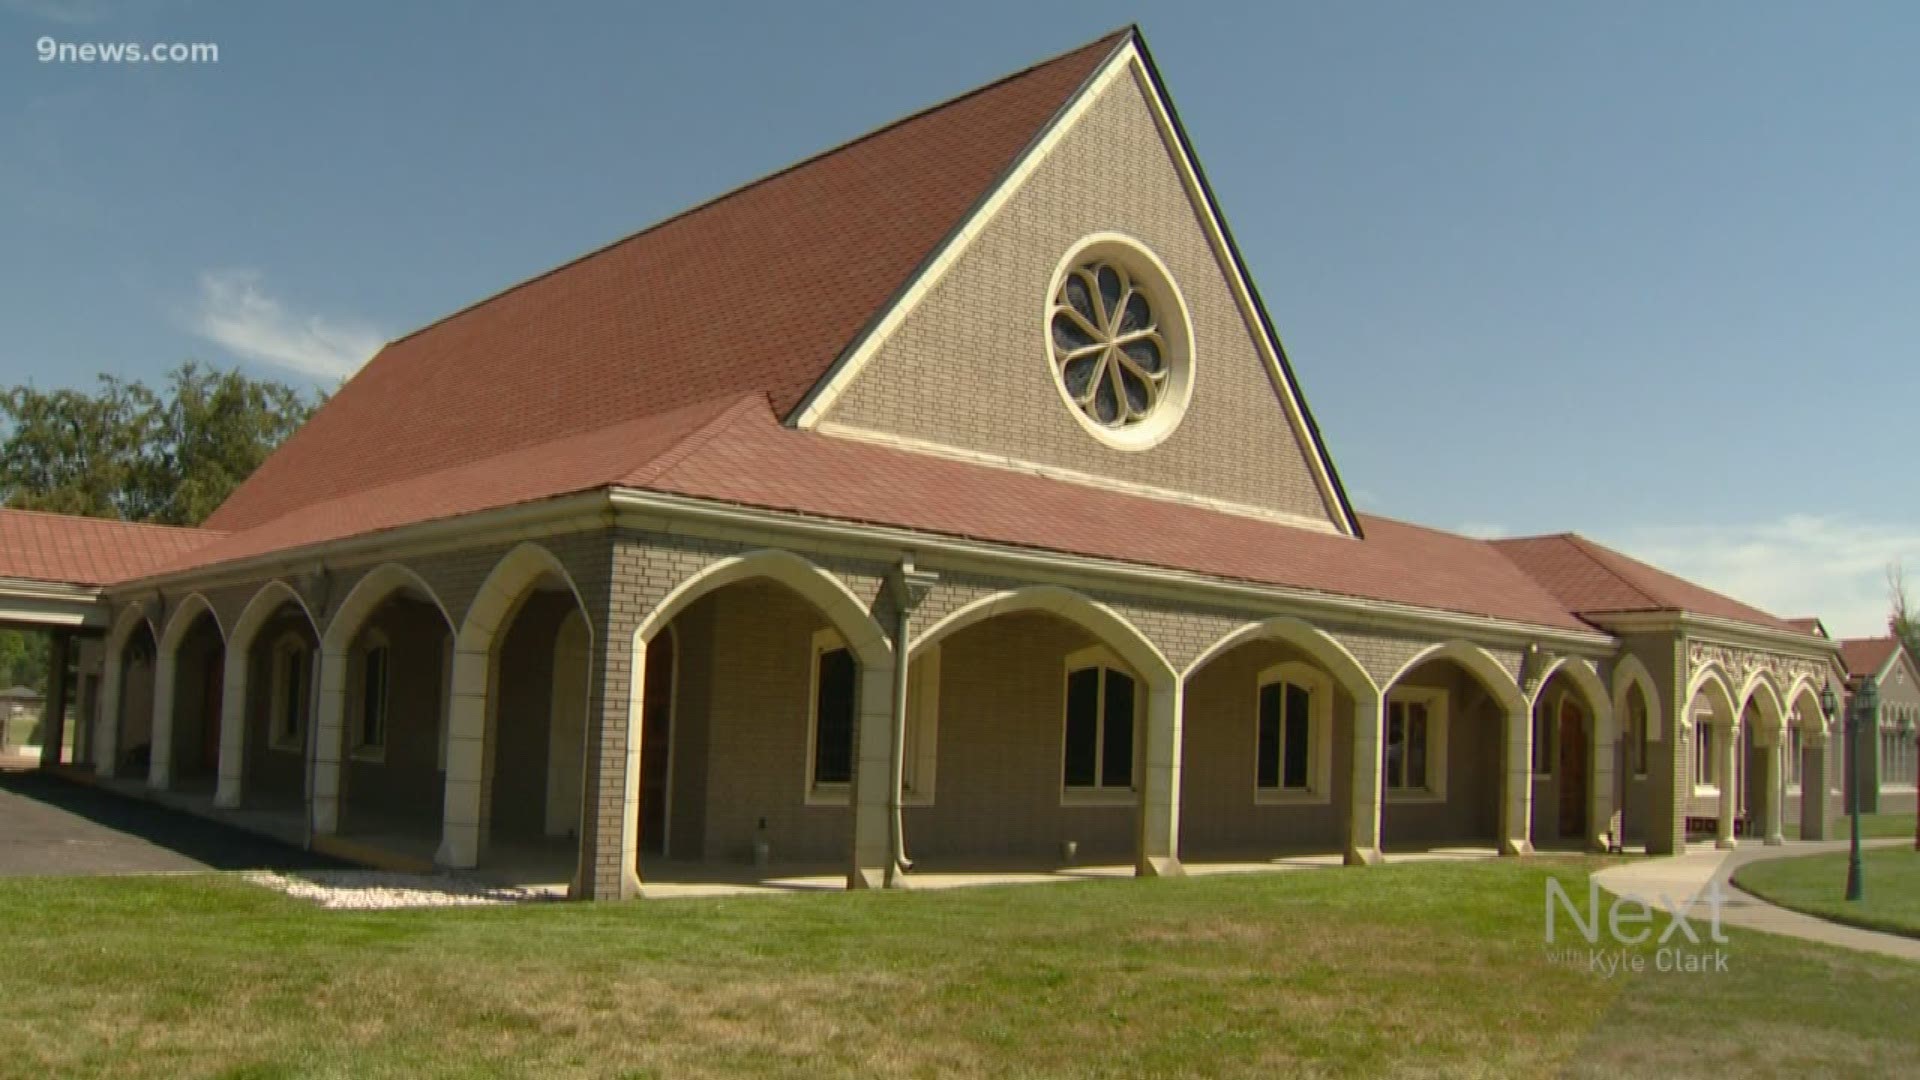 The developers who want to tear down the Berkeley Park Chapel are offering neighbors a compromise - a compromise that still involves tearing down the Berkeley Park Chapel.